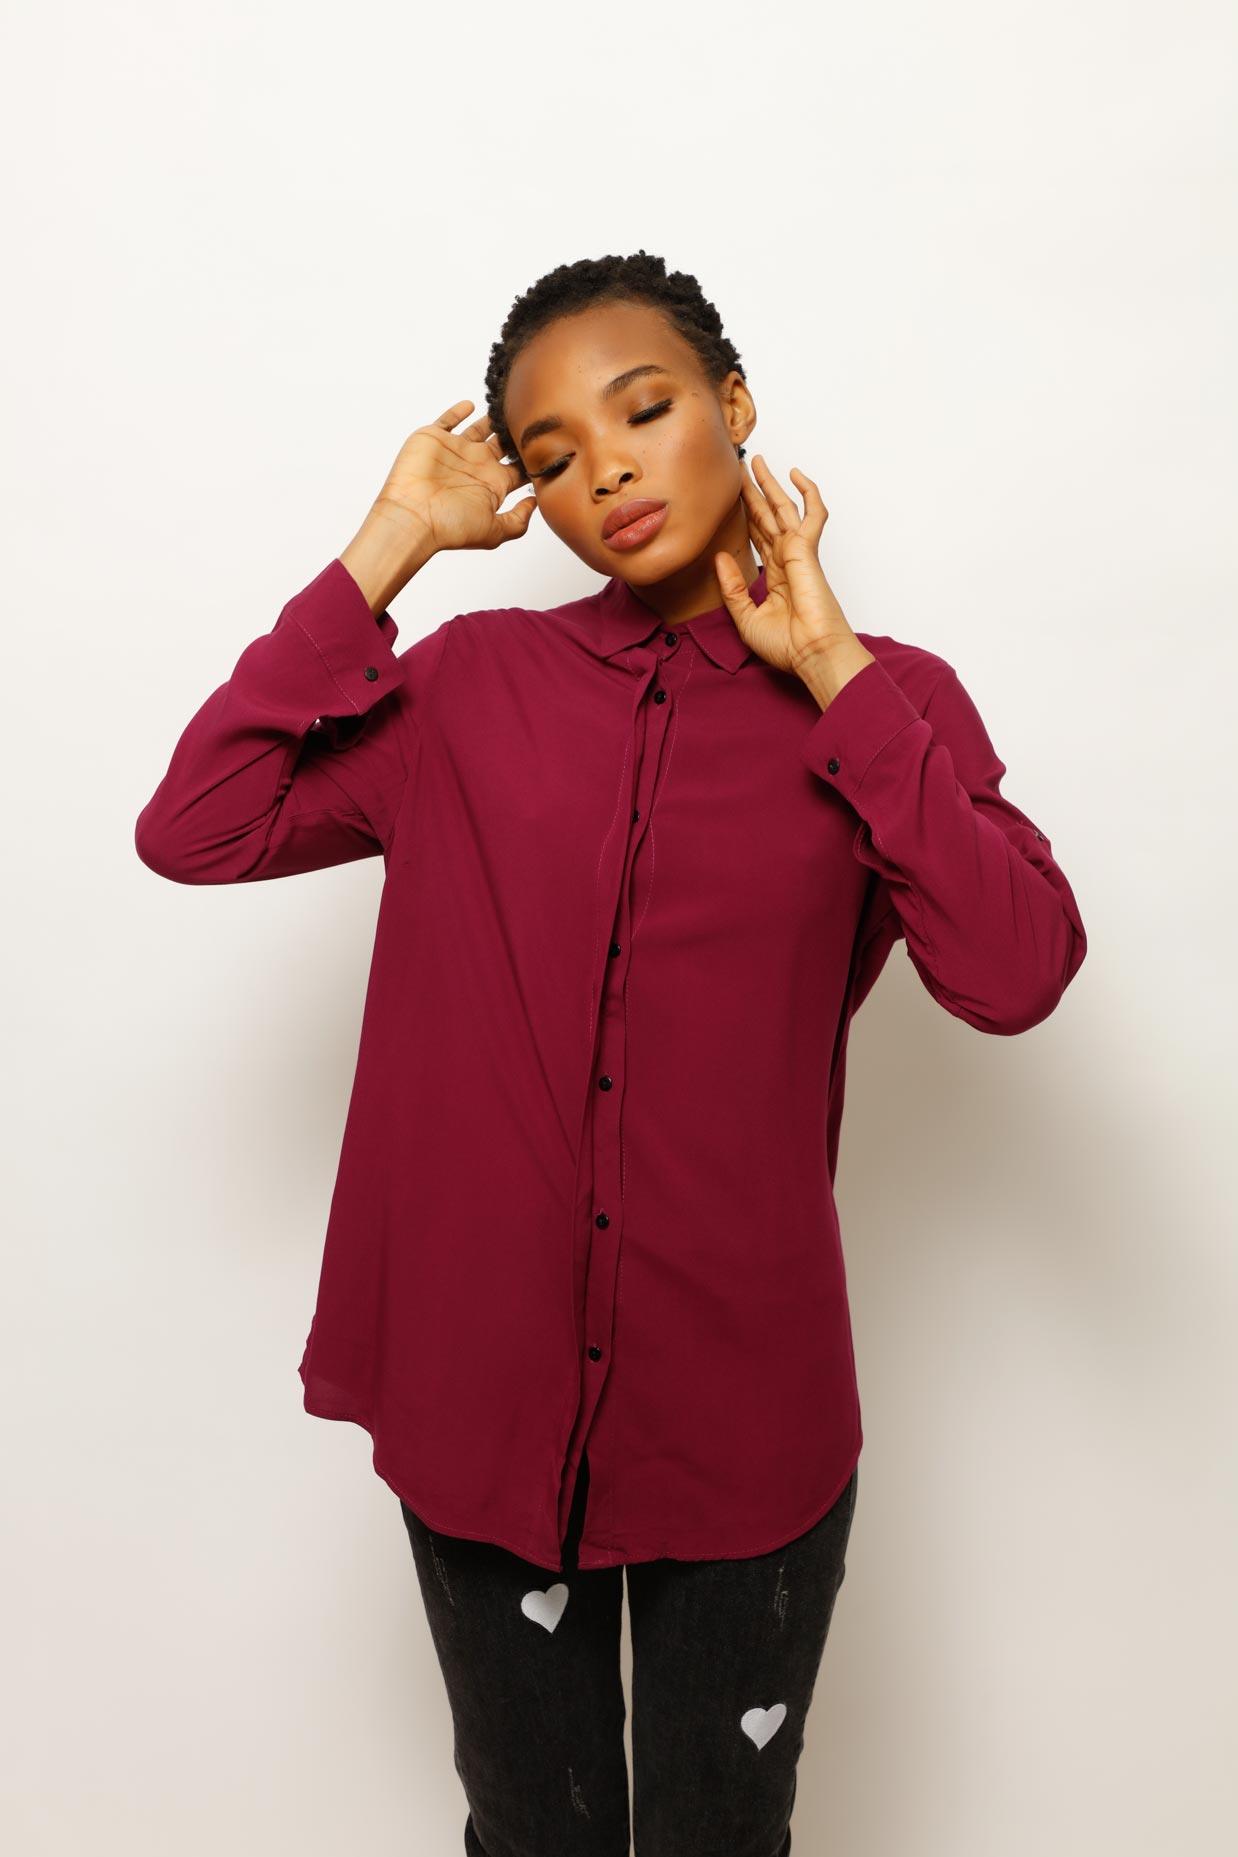 WOMEN'S COLORED CASUAL SHIRT, SHIRT, CORADO, be unique, button, casual, collared, corado fashion, coradomoda, FASHION, label, lifestyle, longsleeve, made in turkey, new collection, shirt, style, top, violet, women, coradomoda, coradomoda.com